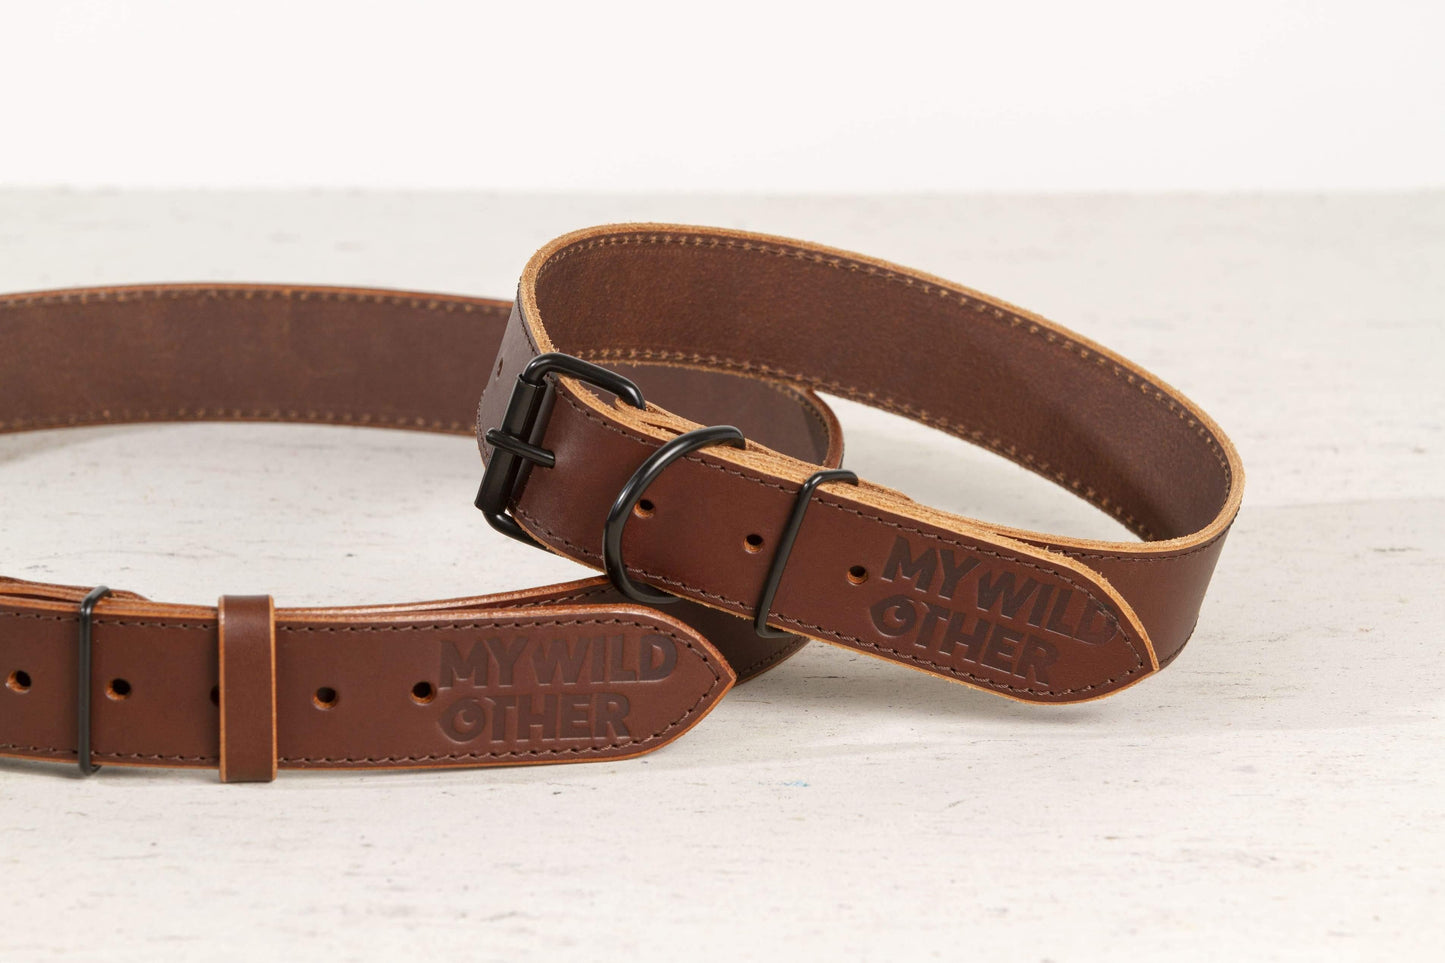 Handmade brown leather dog collar - premium dog goods handmade in Europe by My Wild Other